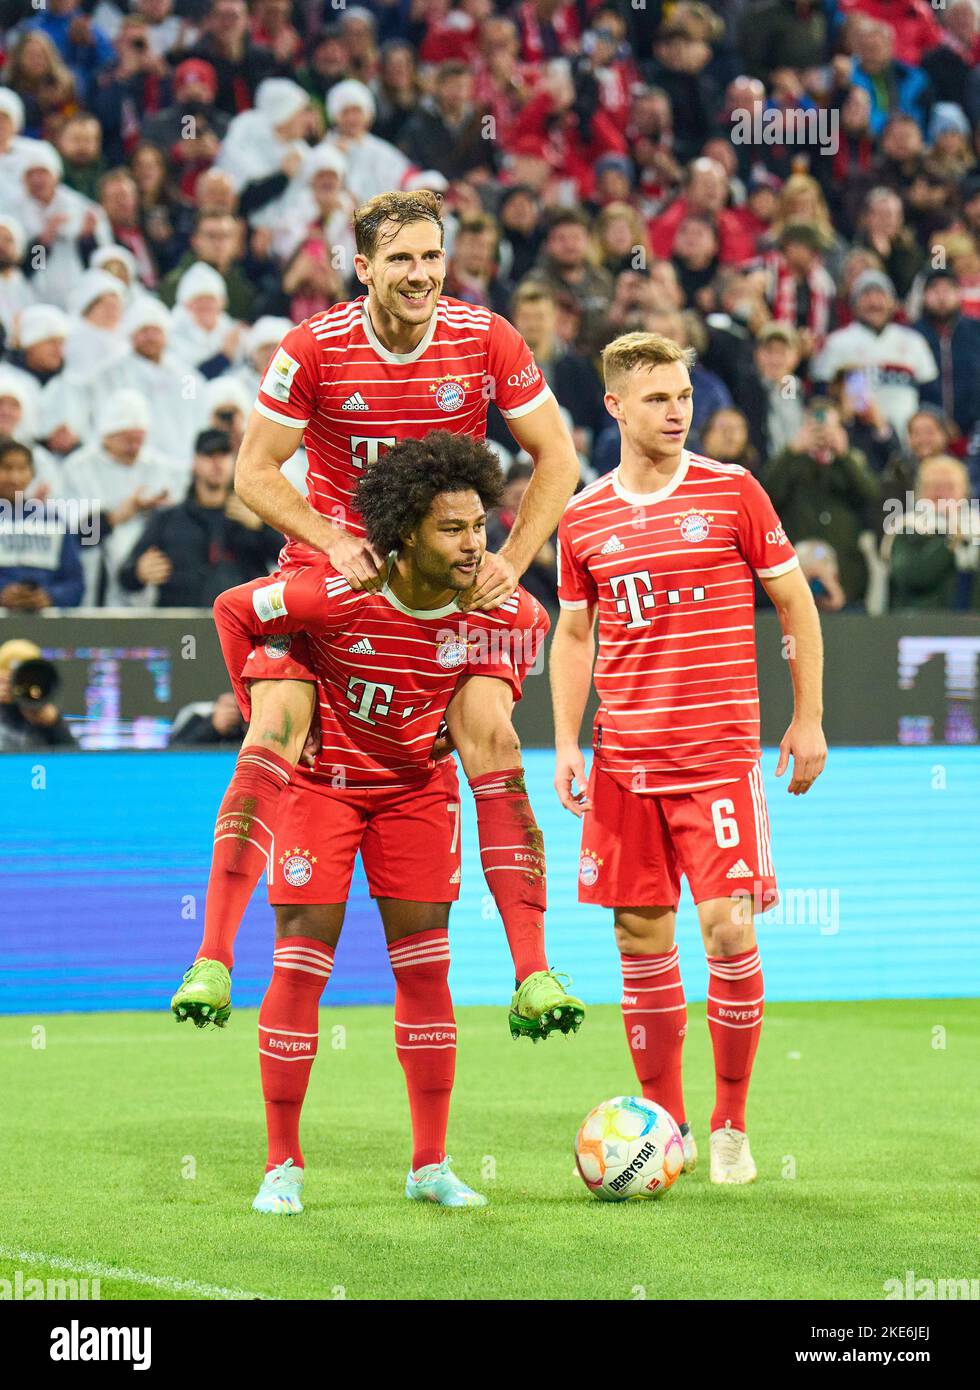 Leon GORETZKA, FCB 8 celebrates his goal, happy, laugh, celebration, 3-1 with Serge GNABRY, FCB 7 Joshua KIMMICH, FCB 6   in the match FC BAYERN MÜNCHEN - SV WERDER BREMEN 6-1 1.German Football League on Nov 8, 2022 in Munich, Germany. Season 2022/2023, matchday 14, 1.Bundesliga, FCB, München, 14.Spieltag © Peter Schatz / Alamy Live News    - DFL REGULATIONS PROHIBIT ANY USE OF PHOTOGRAPHS as IMAGE SEQUENCES and/or QUASI-VIDEO - Stock Photo